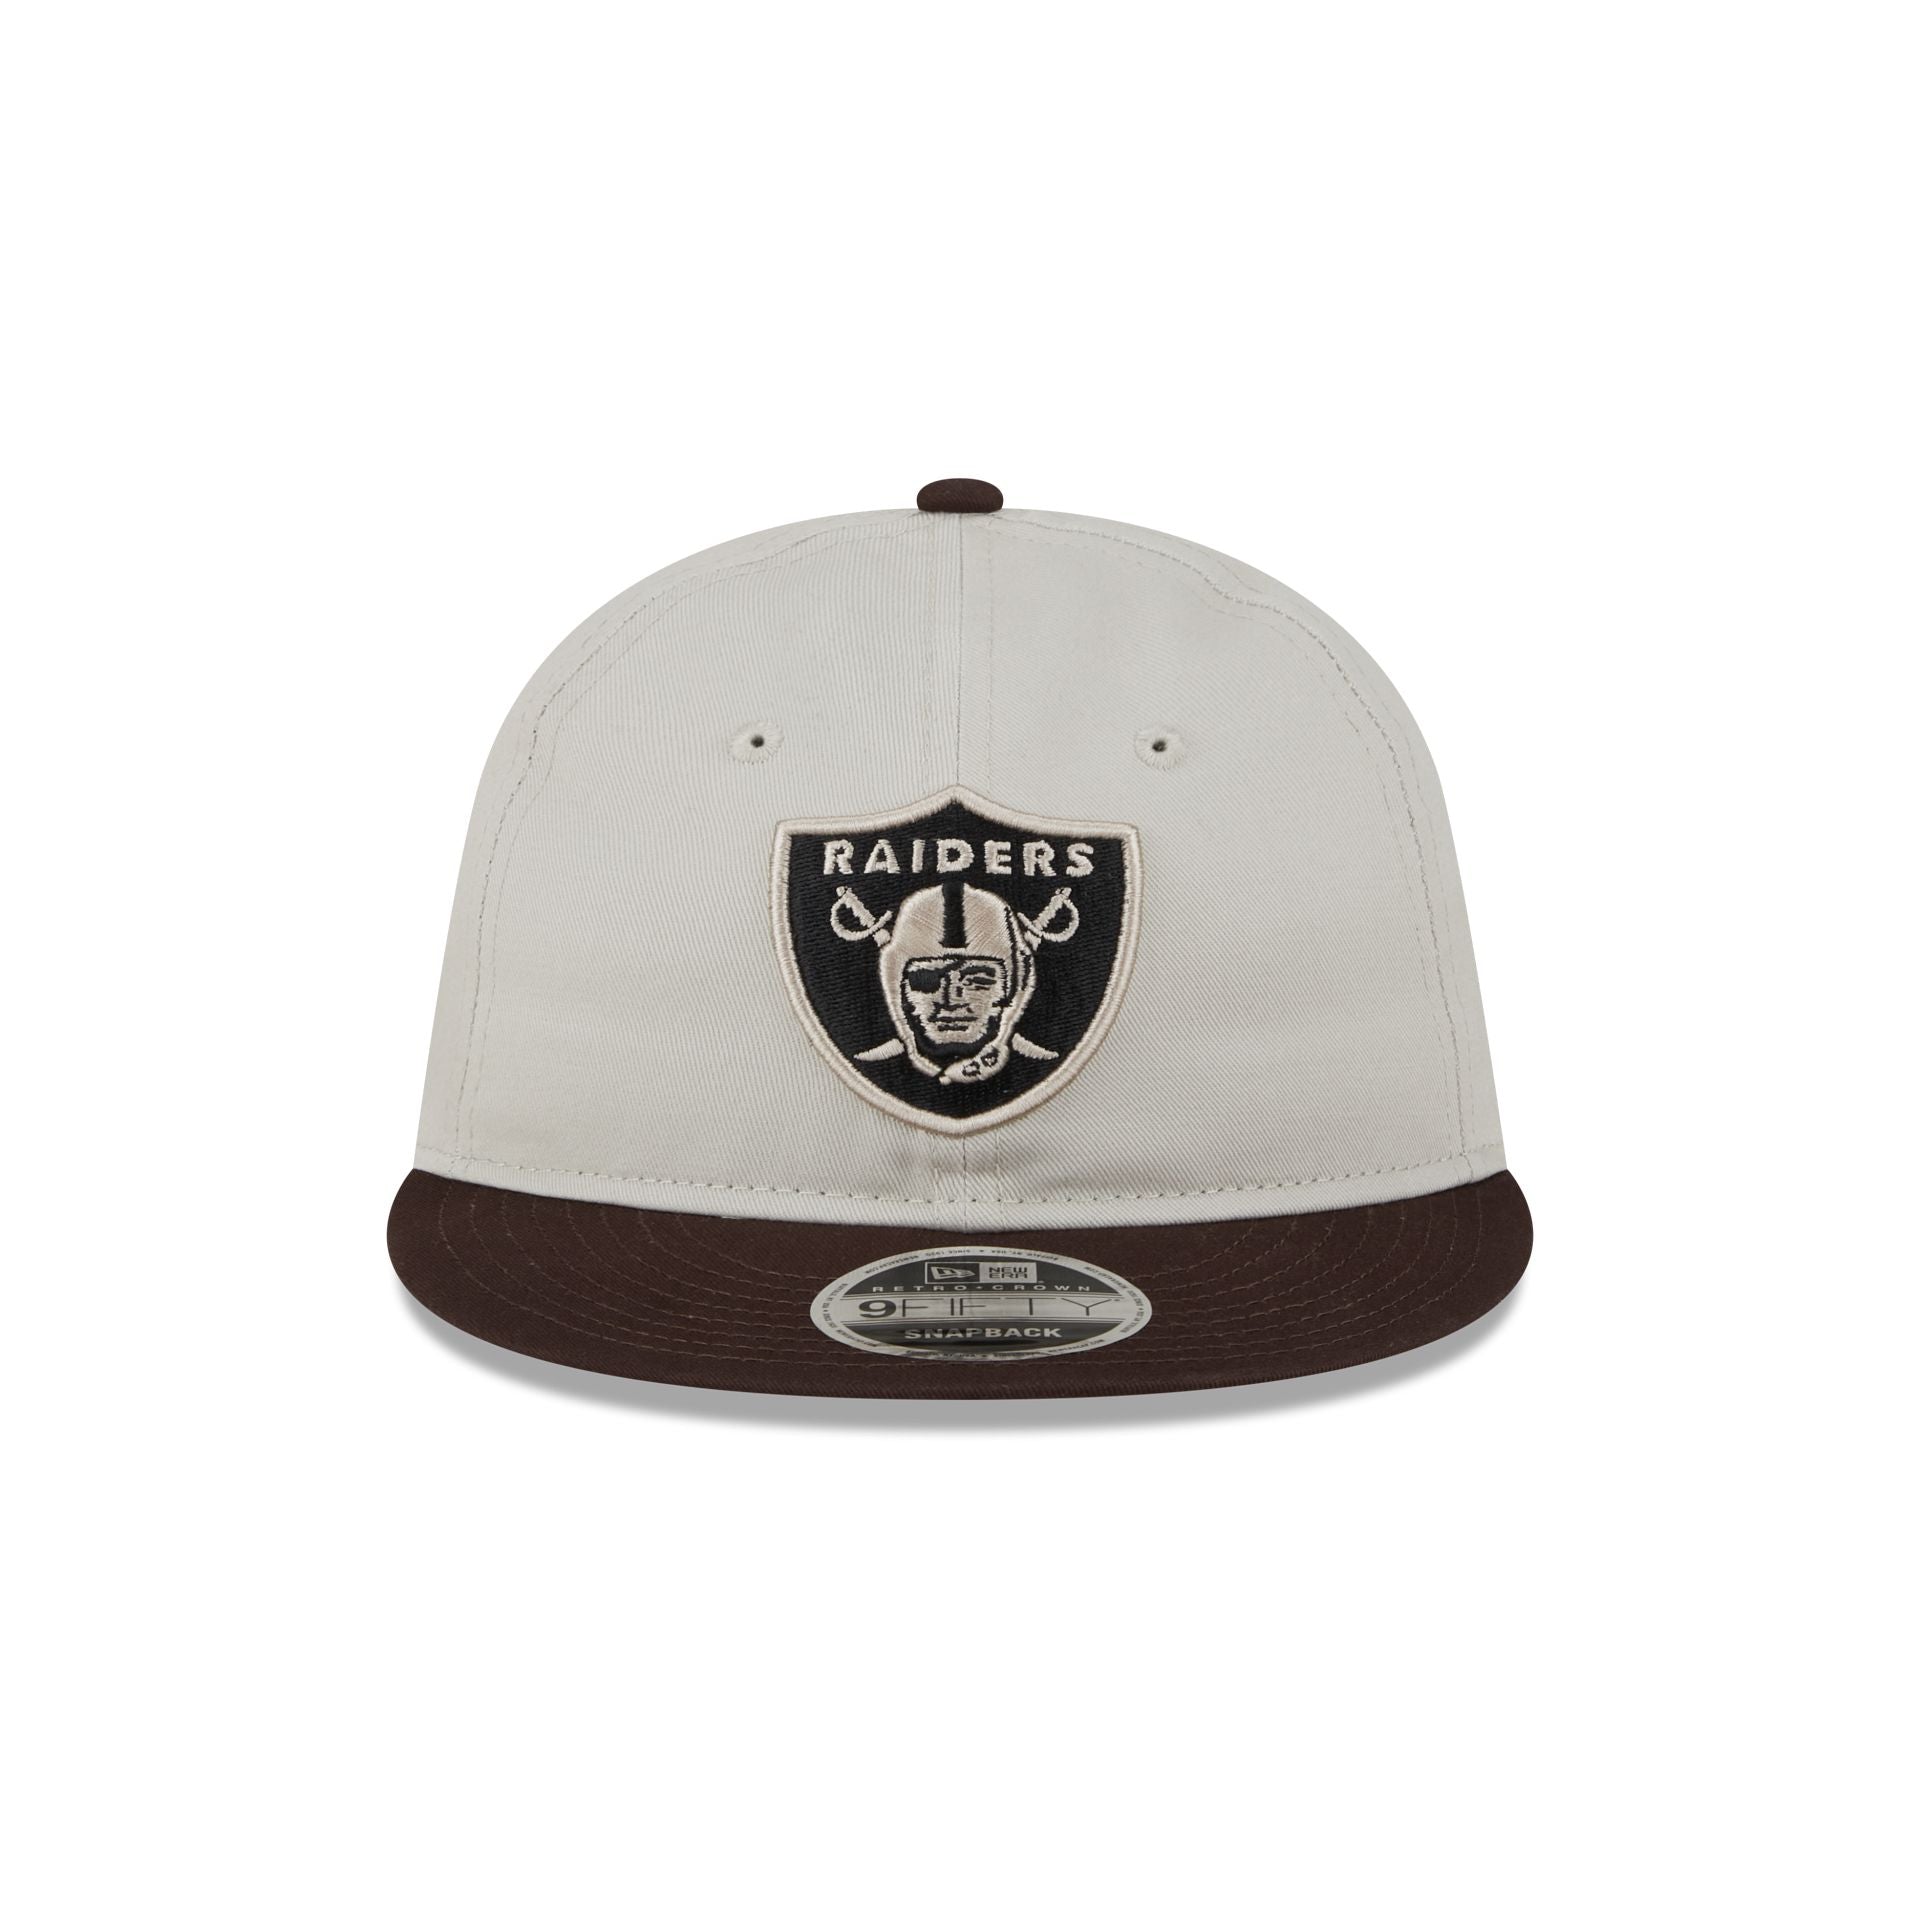 OAKLAND RAIDERS TWO-TONE COMPETITOR SERIES